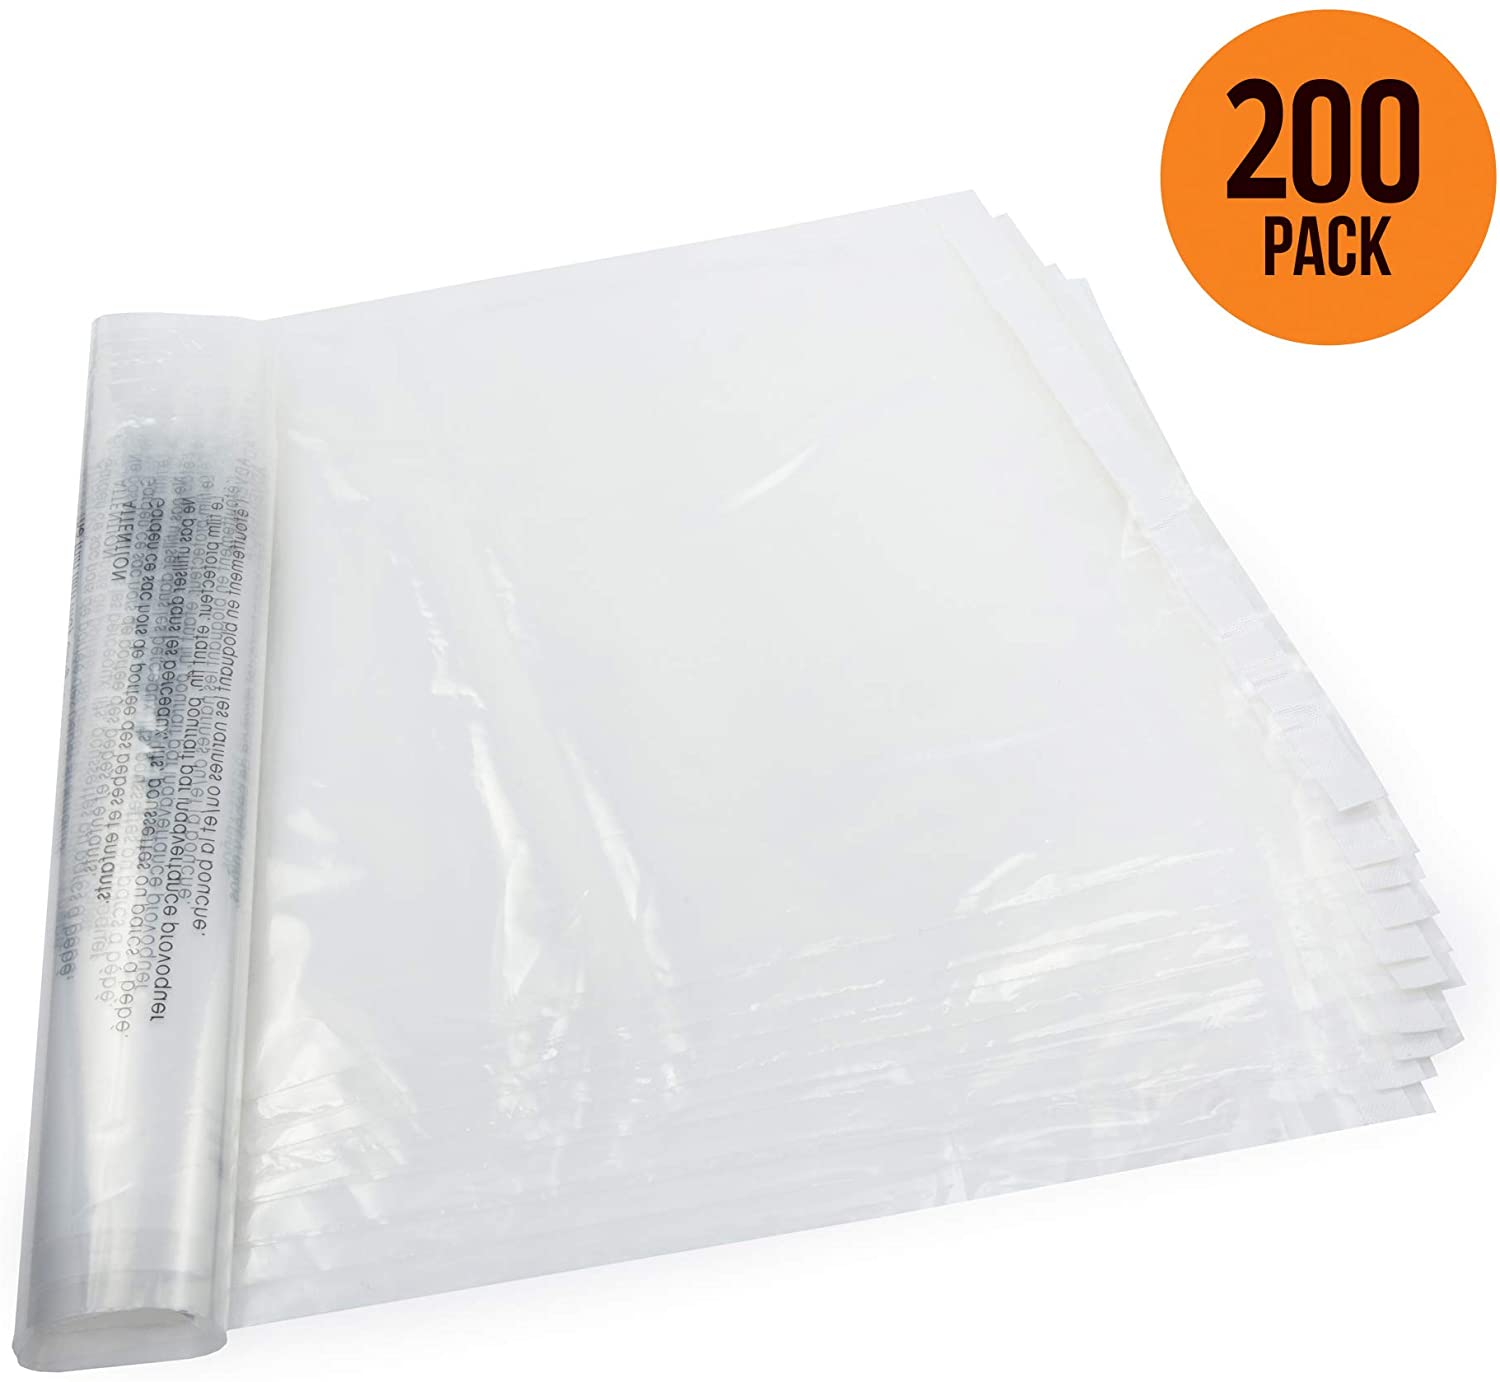 14 x 20 industrial clear poly bags pack of 200 